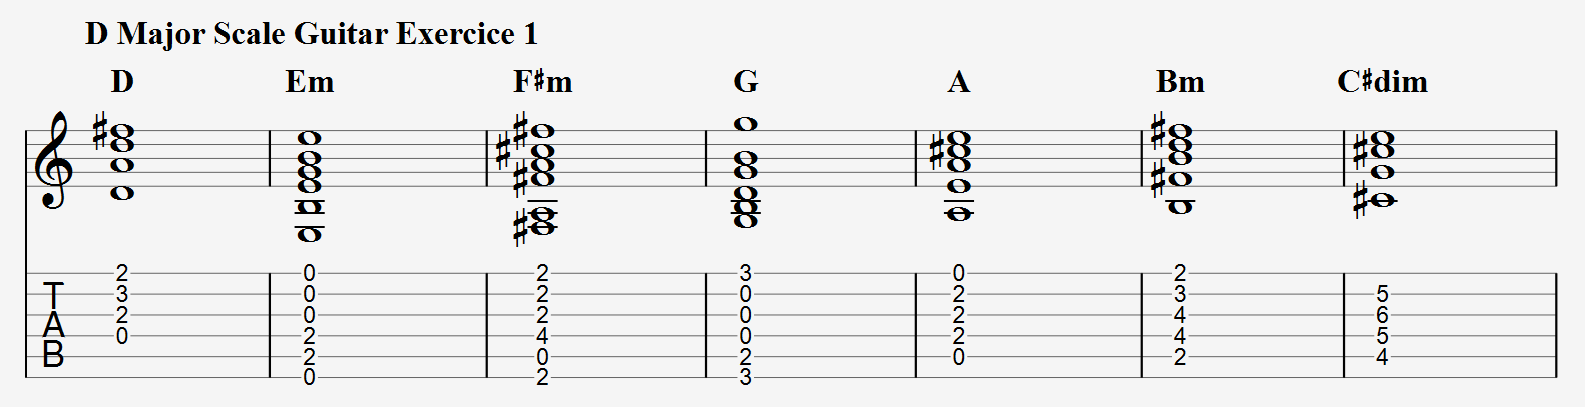 D Major Scale Guitar Exercise 1